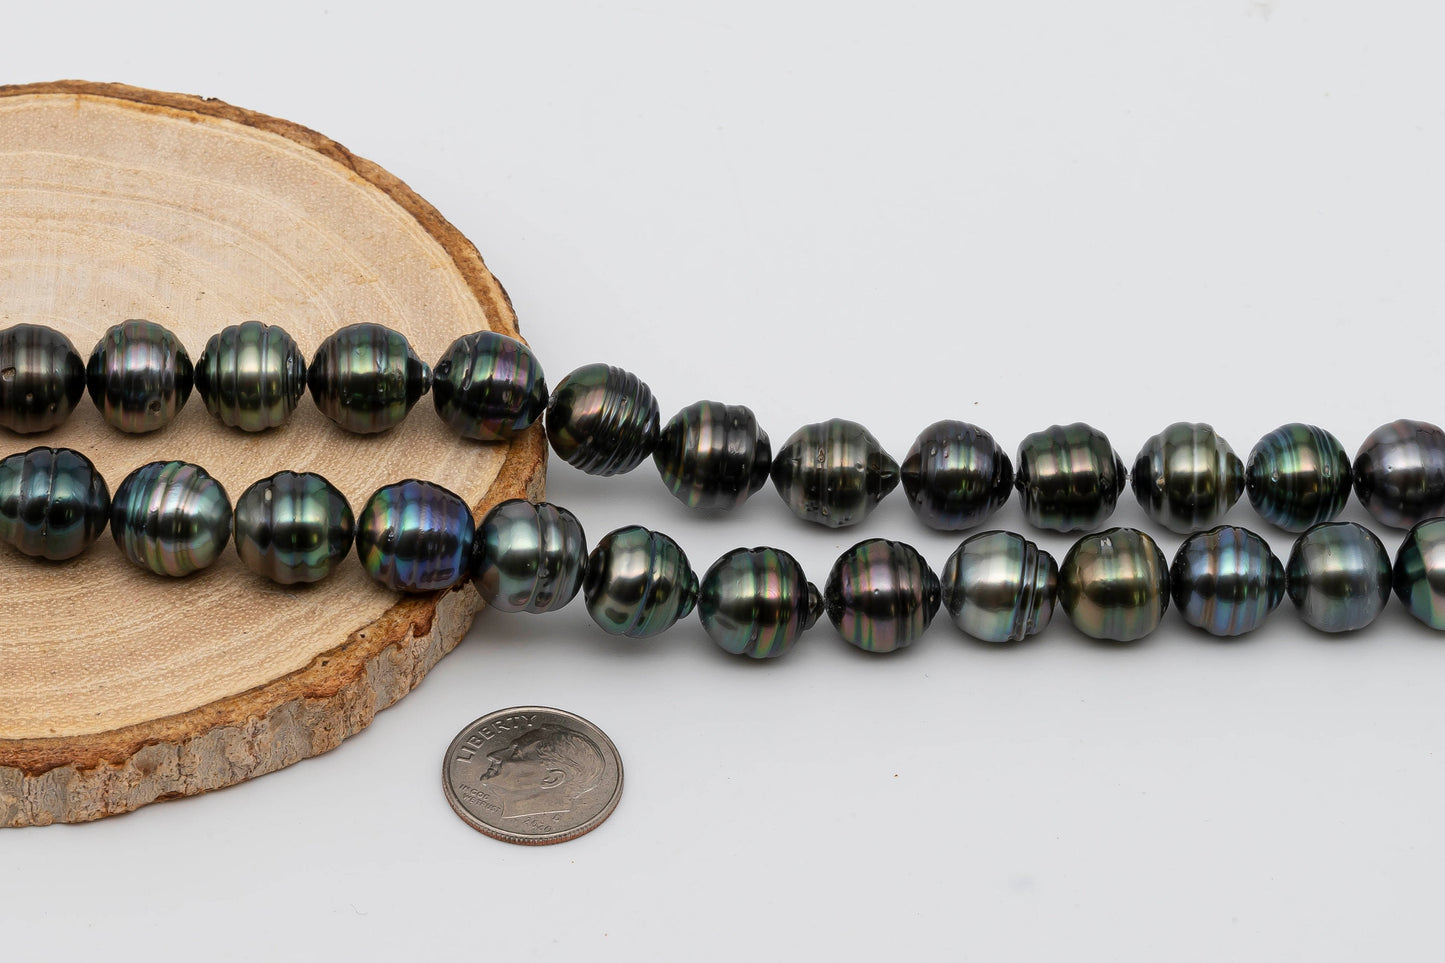 11-12mm Teardrop Black Tahitian Pearl in Natural Color and High Luster for Beading or Jewelry Making, SKU # 1298TH